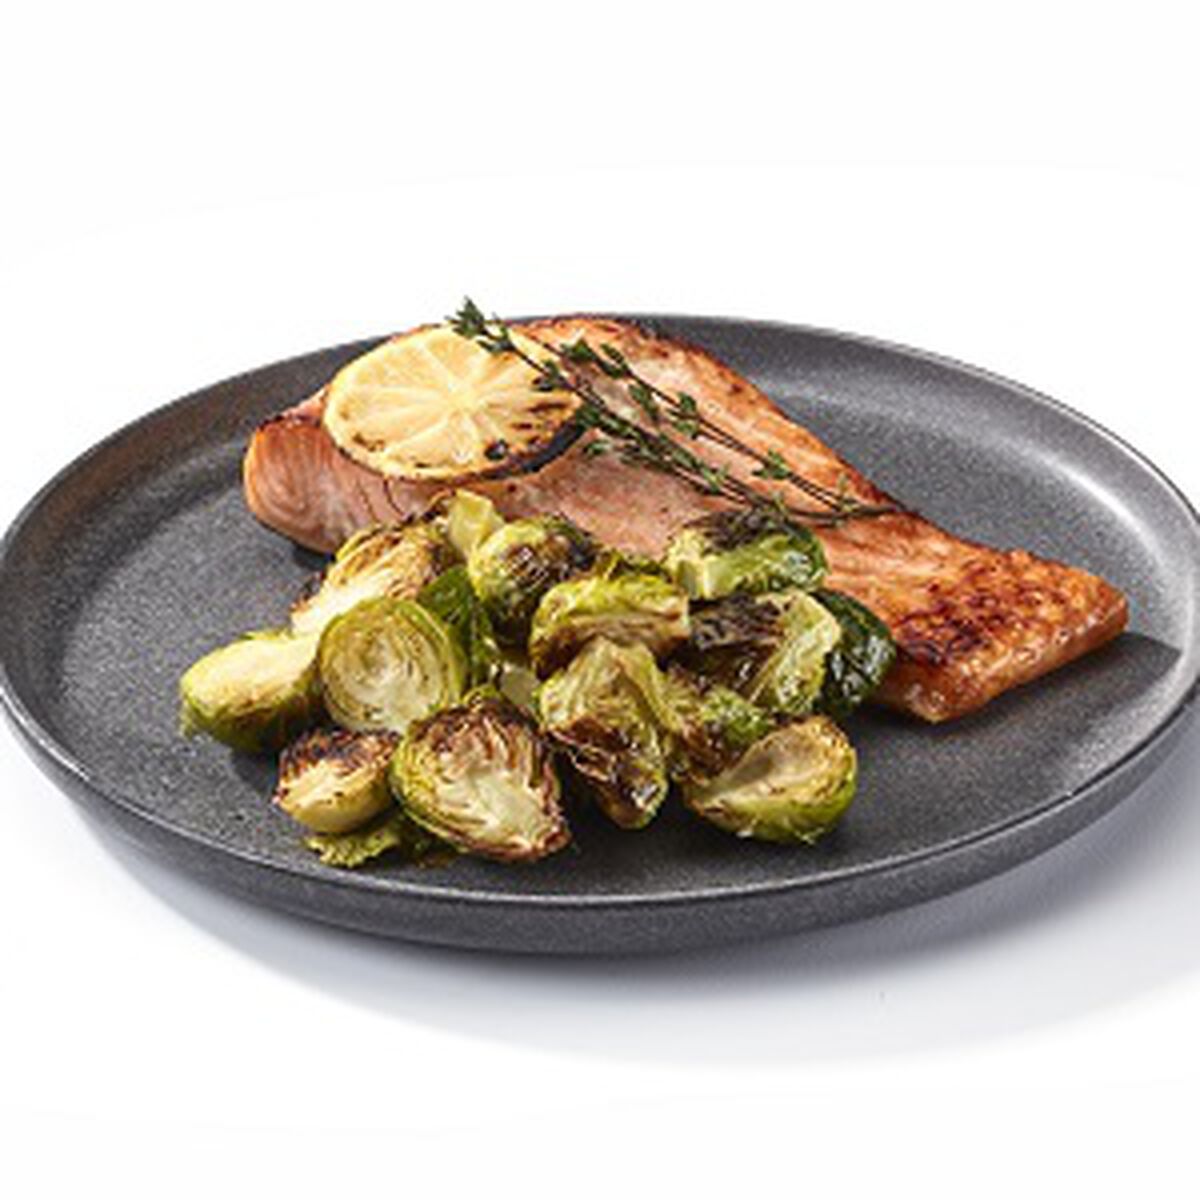 Thyme-Glazed Salmon with Brussels Sprouts-1